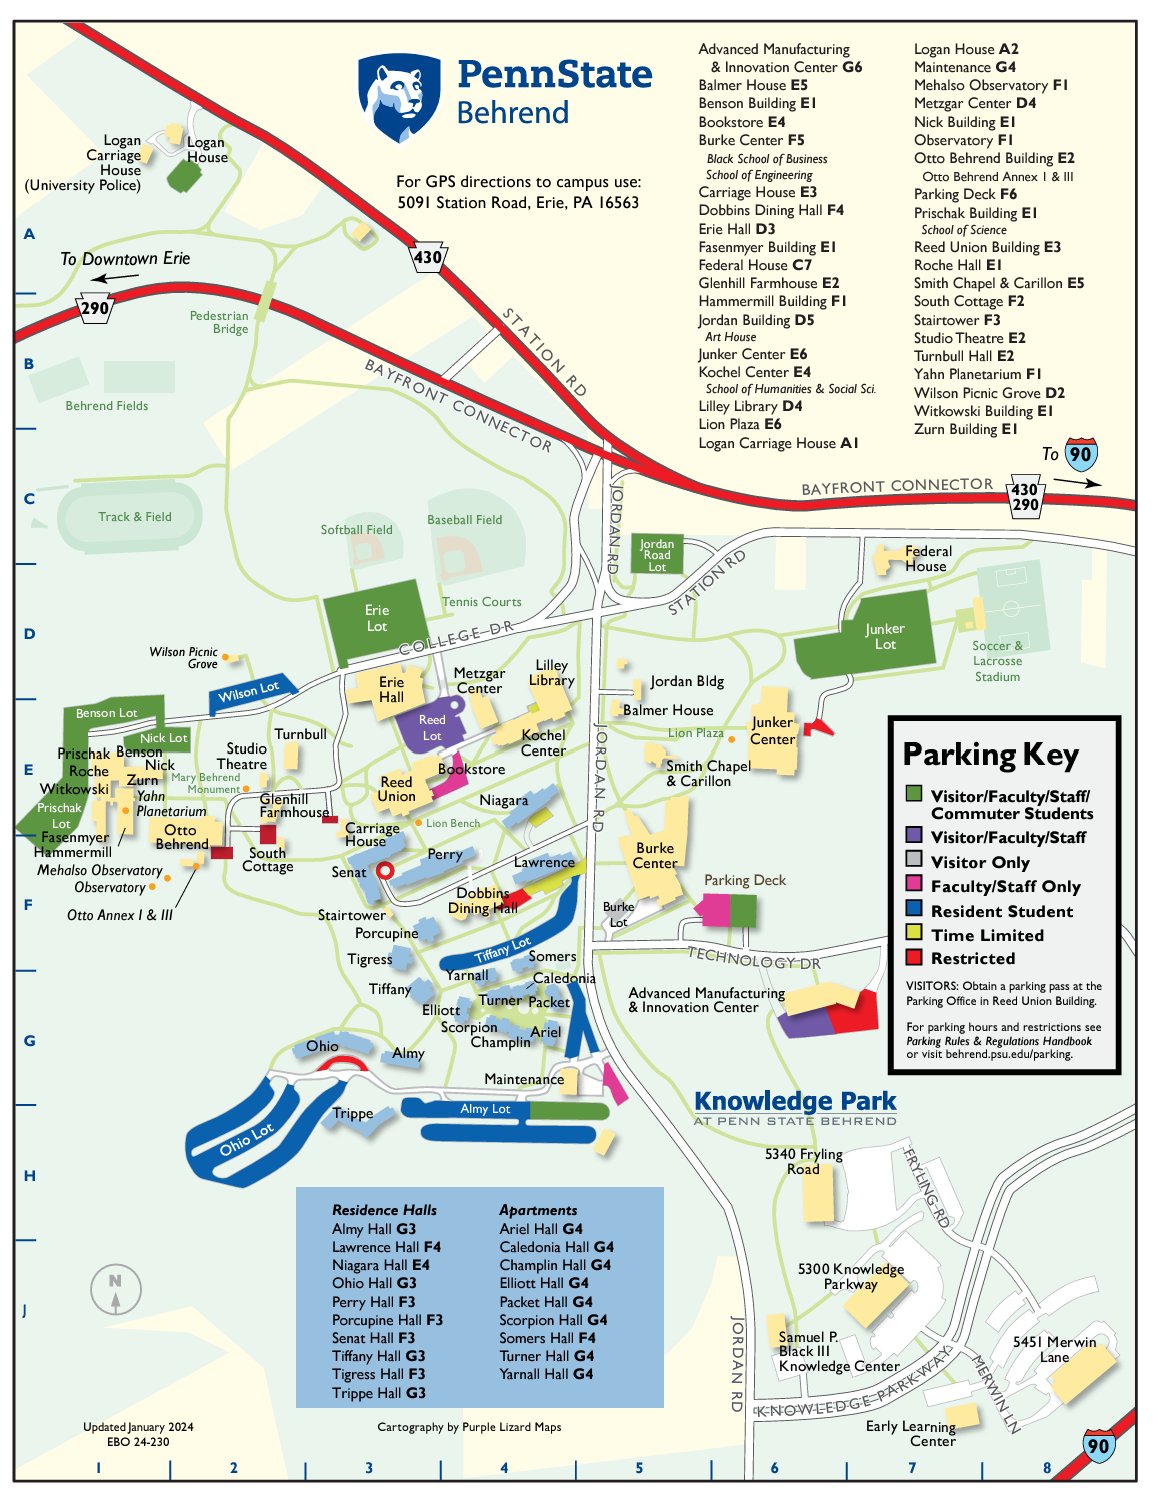 Image of the Behrend campus map